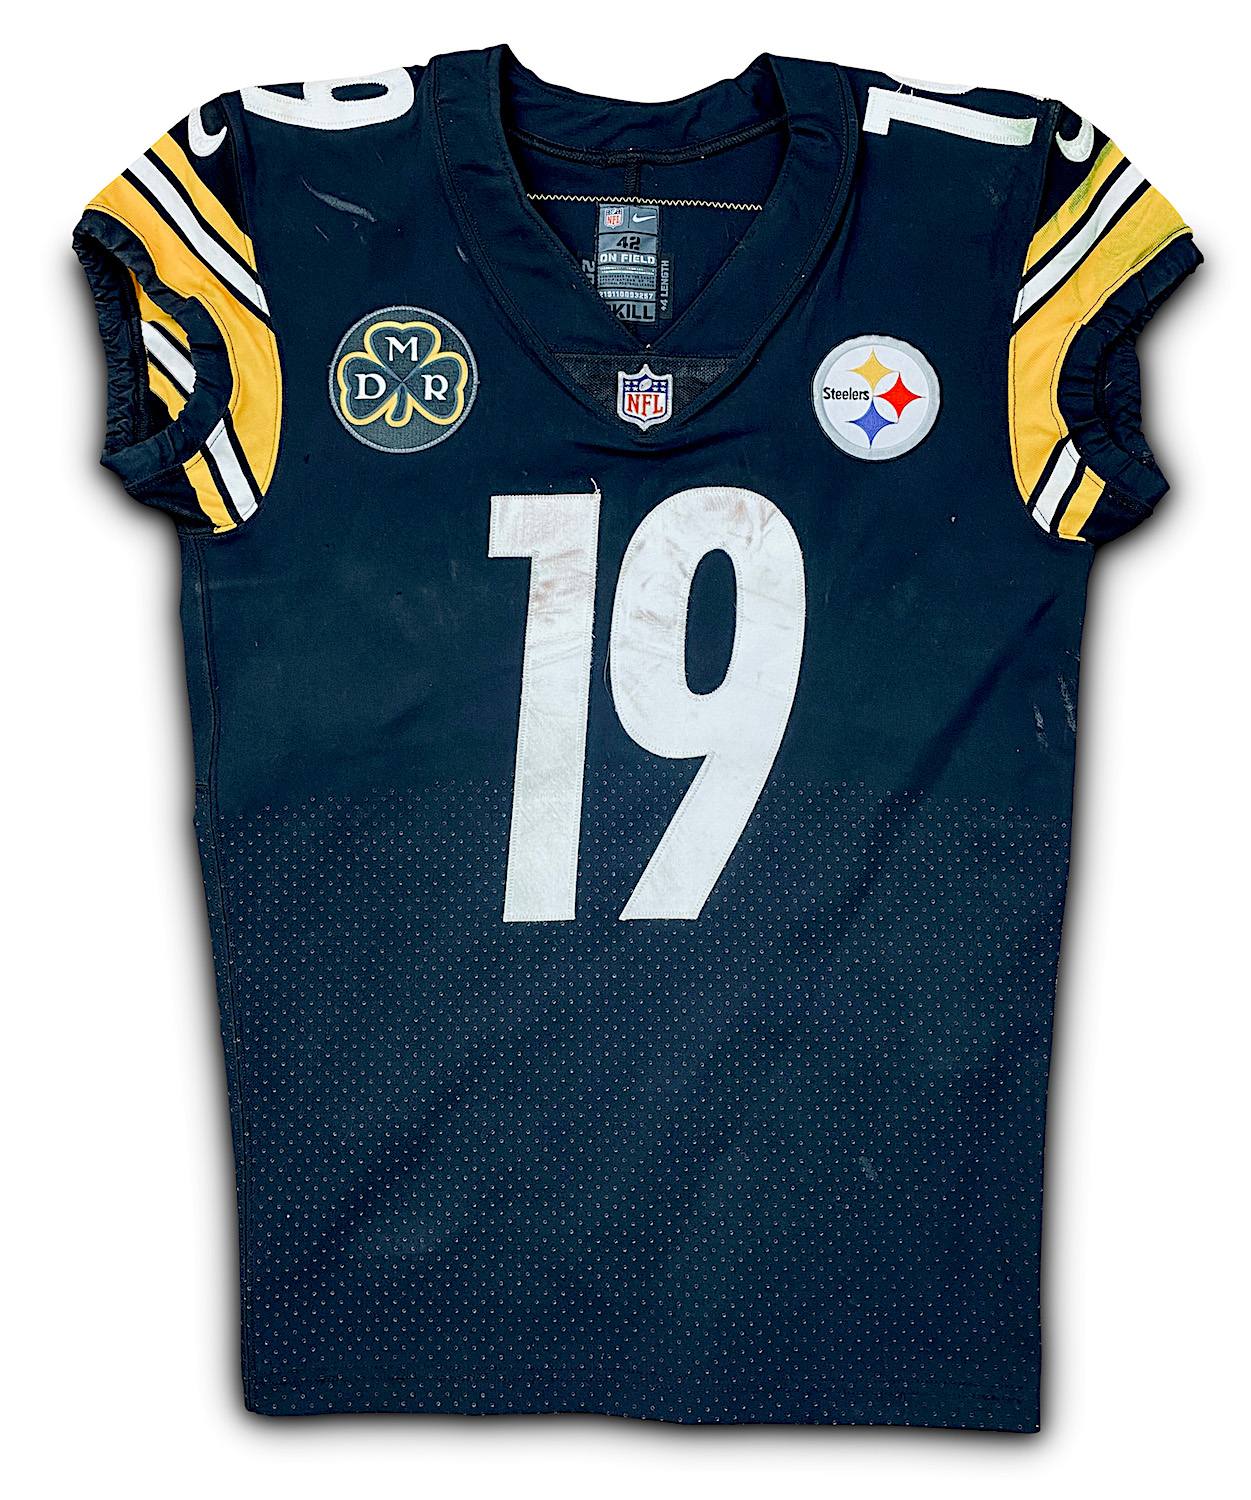 Lot Detail - JuJu Smith-Schuster 1/14/18 Pittsburgh Steelers Game Worn,  Signed & Inscribed ROOKIE Playoff Jersey - Photo Matched (Athletes Club Co,  RGU) DMR Patch